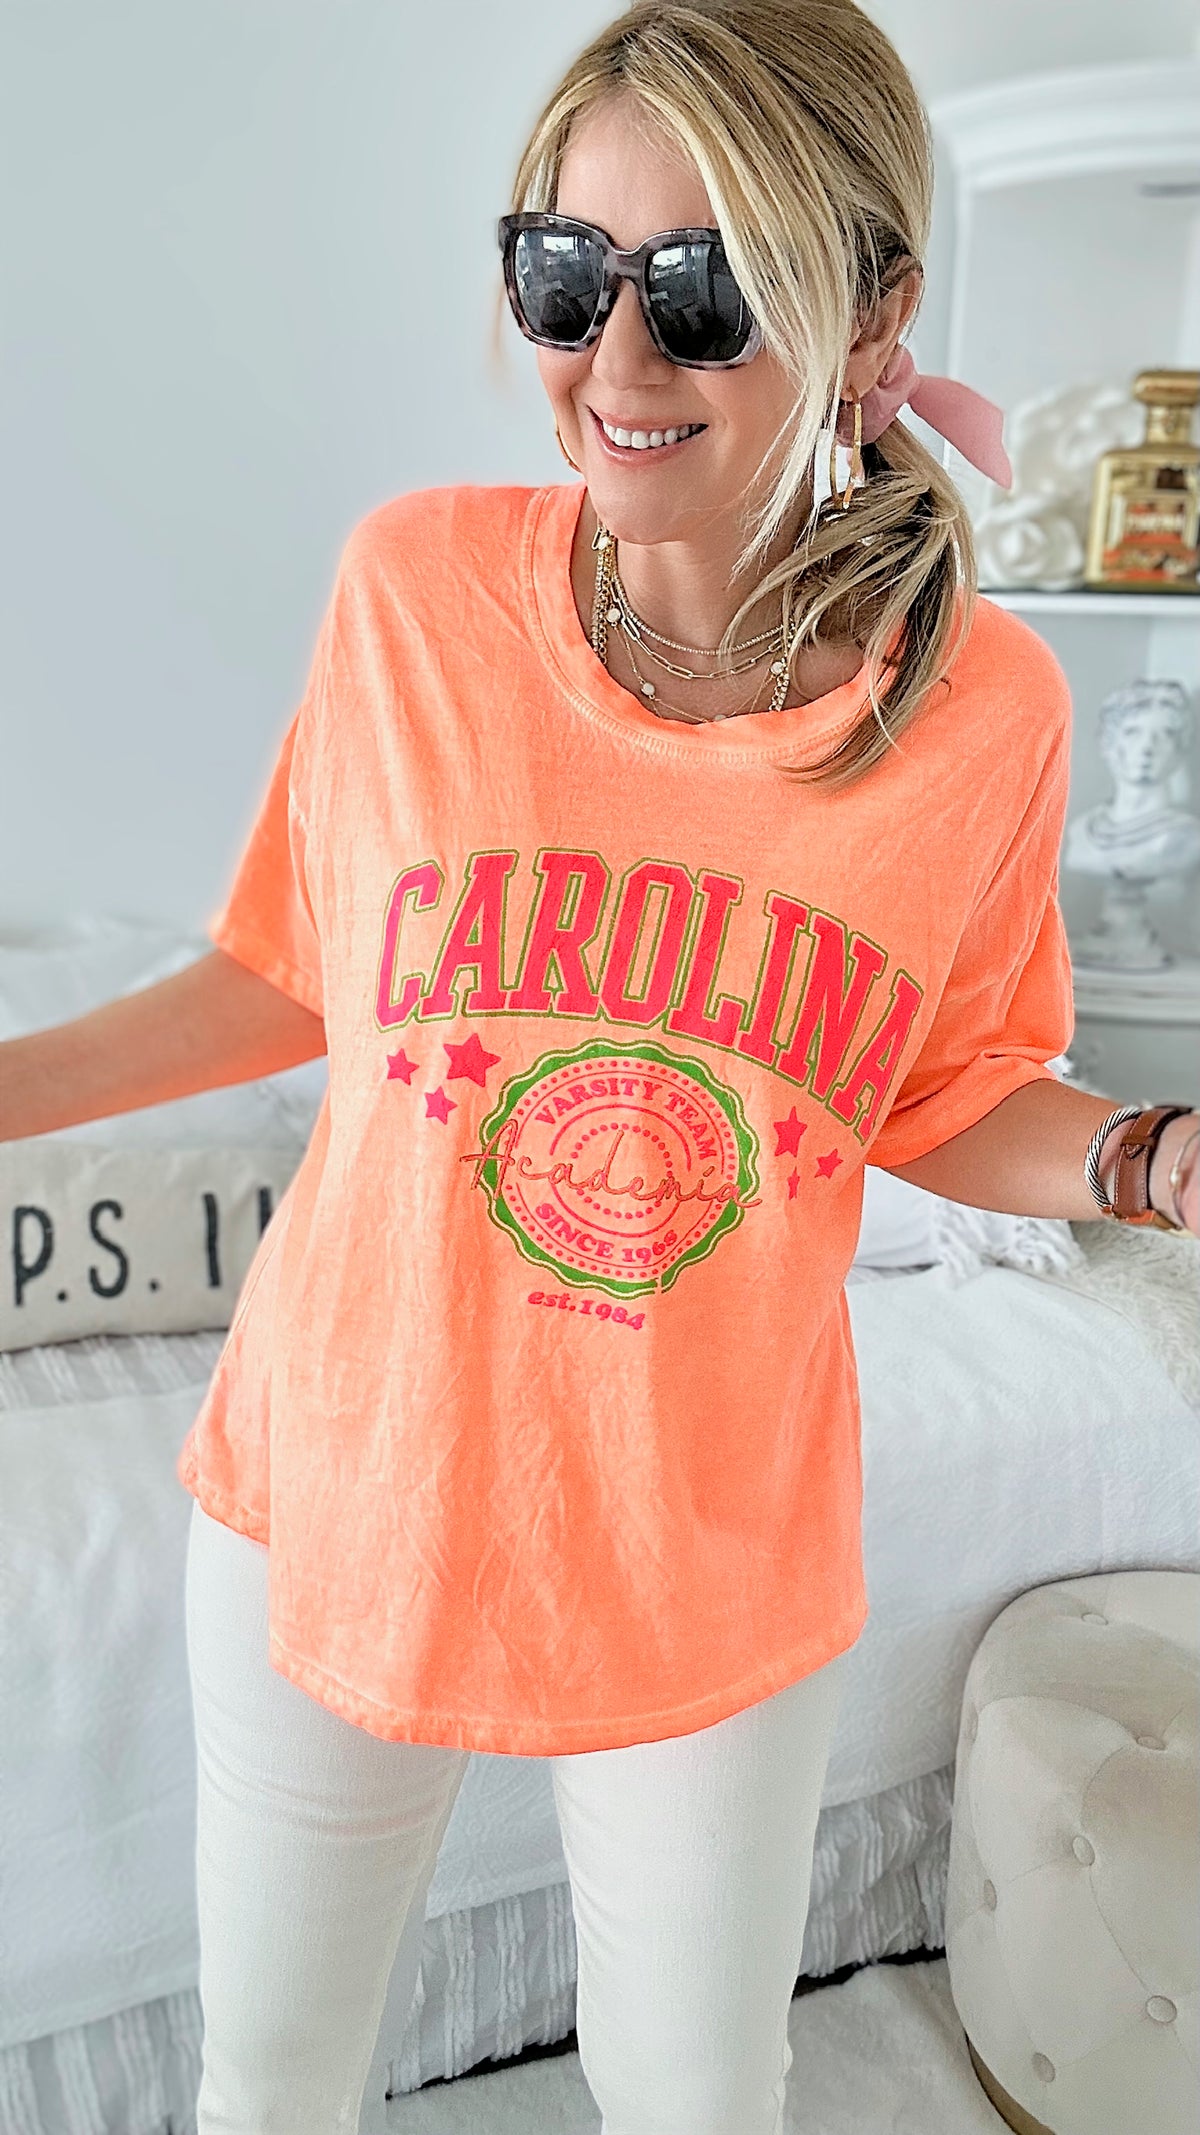 Carolina Graphic Tee - Neon Orange-120 Graphic-Yolly-Coastal Bloom Boutique, find the trendiest versions of the popular styles and looks Located in Indialantic, FL